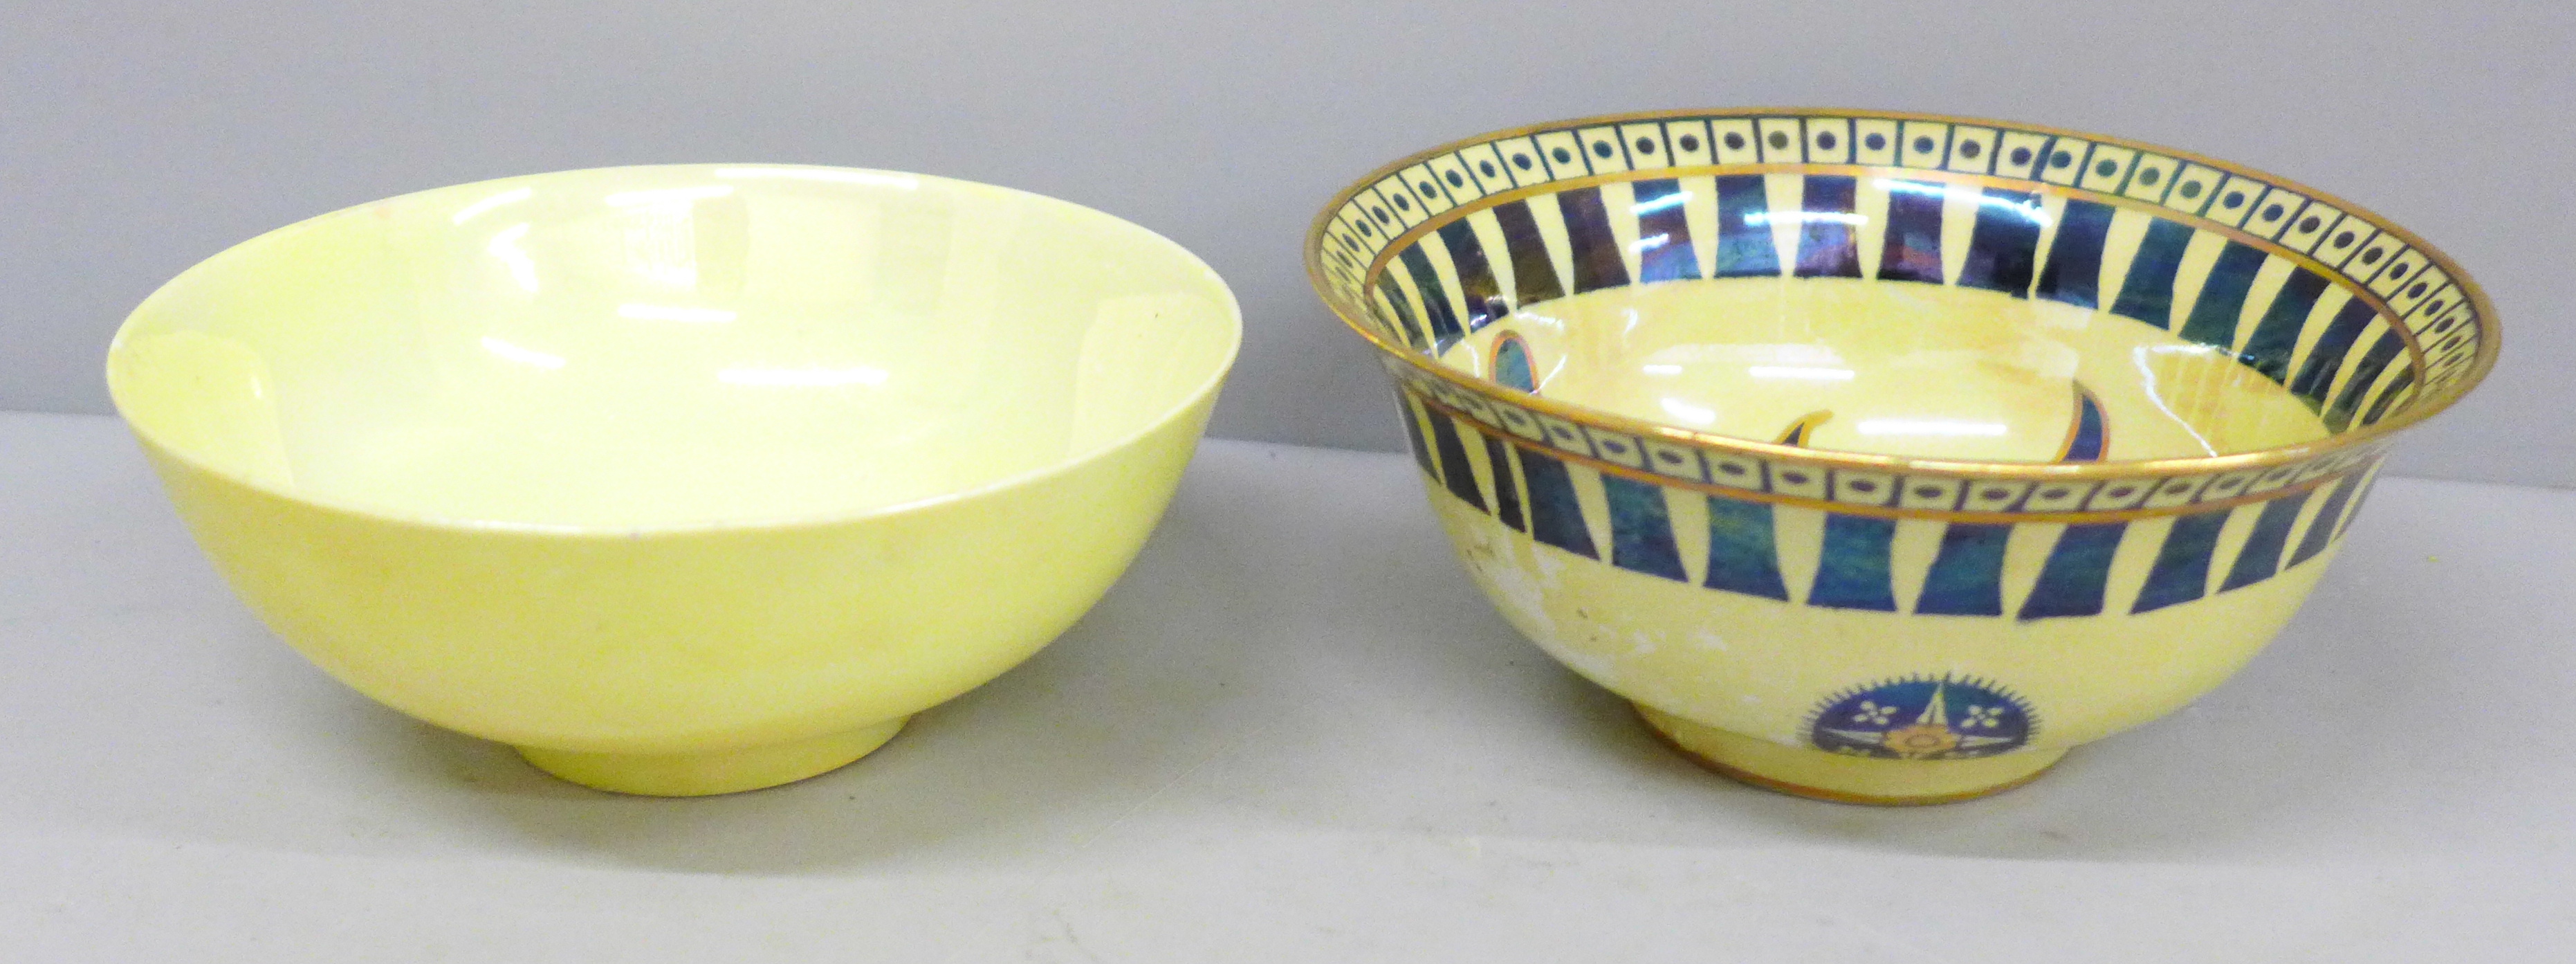 Two Art pottery bowls comprising Thos. Till & Sons Burslem lustre ware bowl and a Royal Doulton